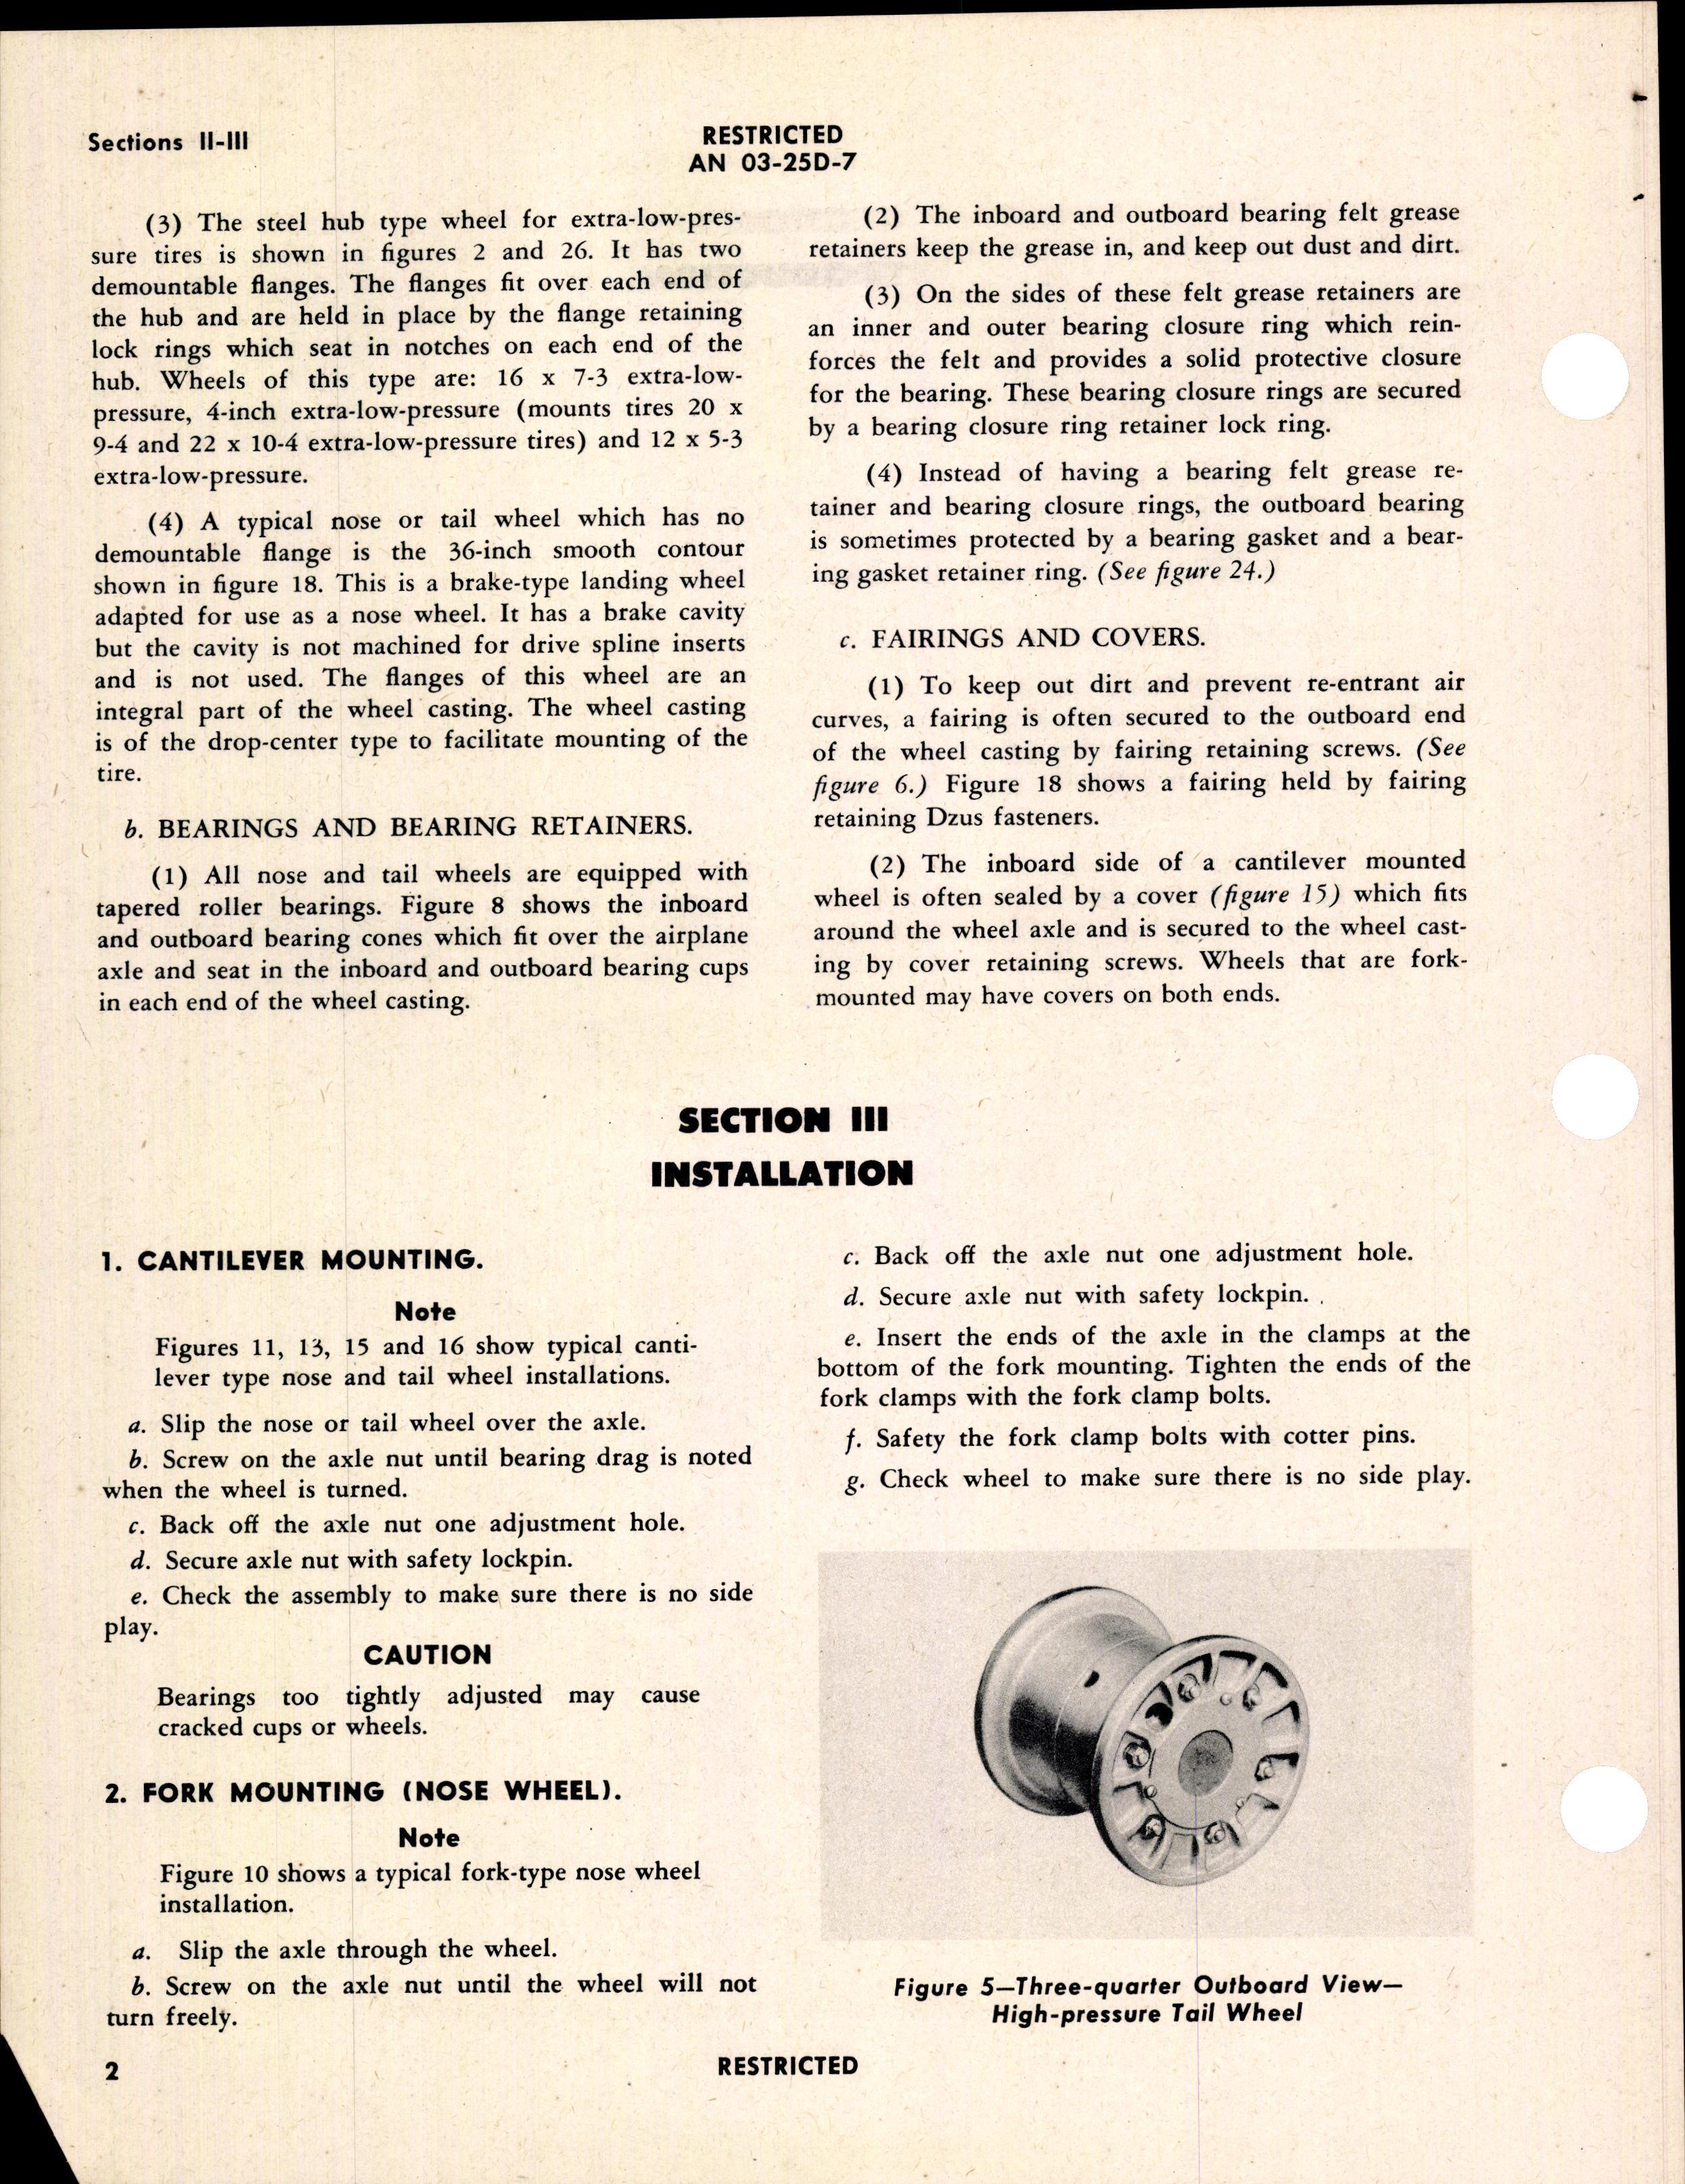 Sample page 8 from AirCorps Library document: Operation, Service, & Overhaul Instructions with Parts Catalog for Goodyear Nose and Tail Wheels